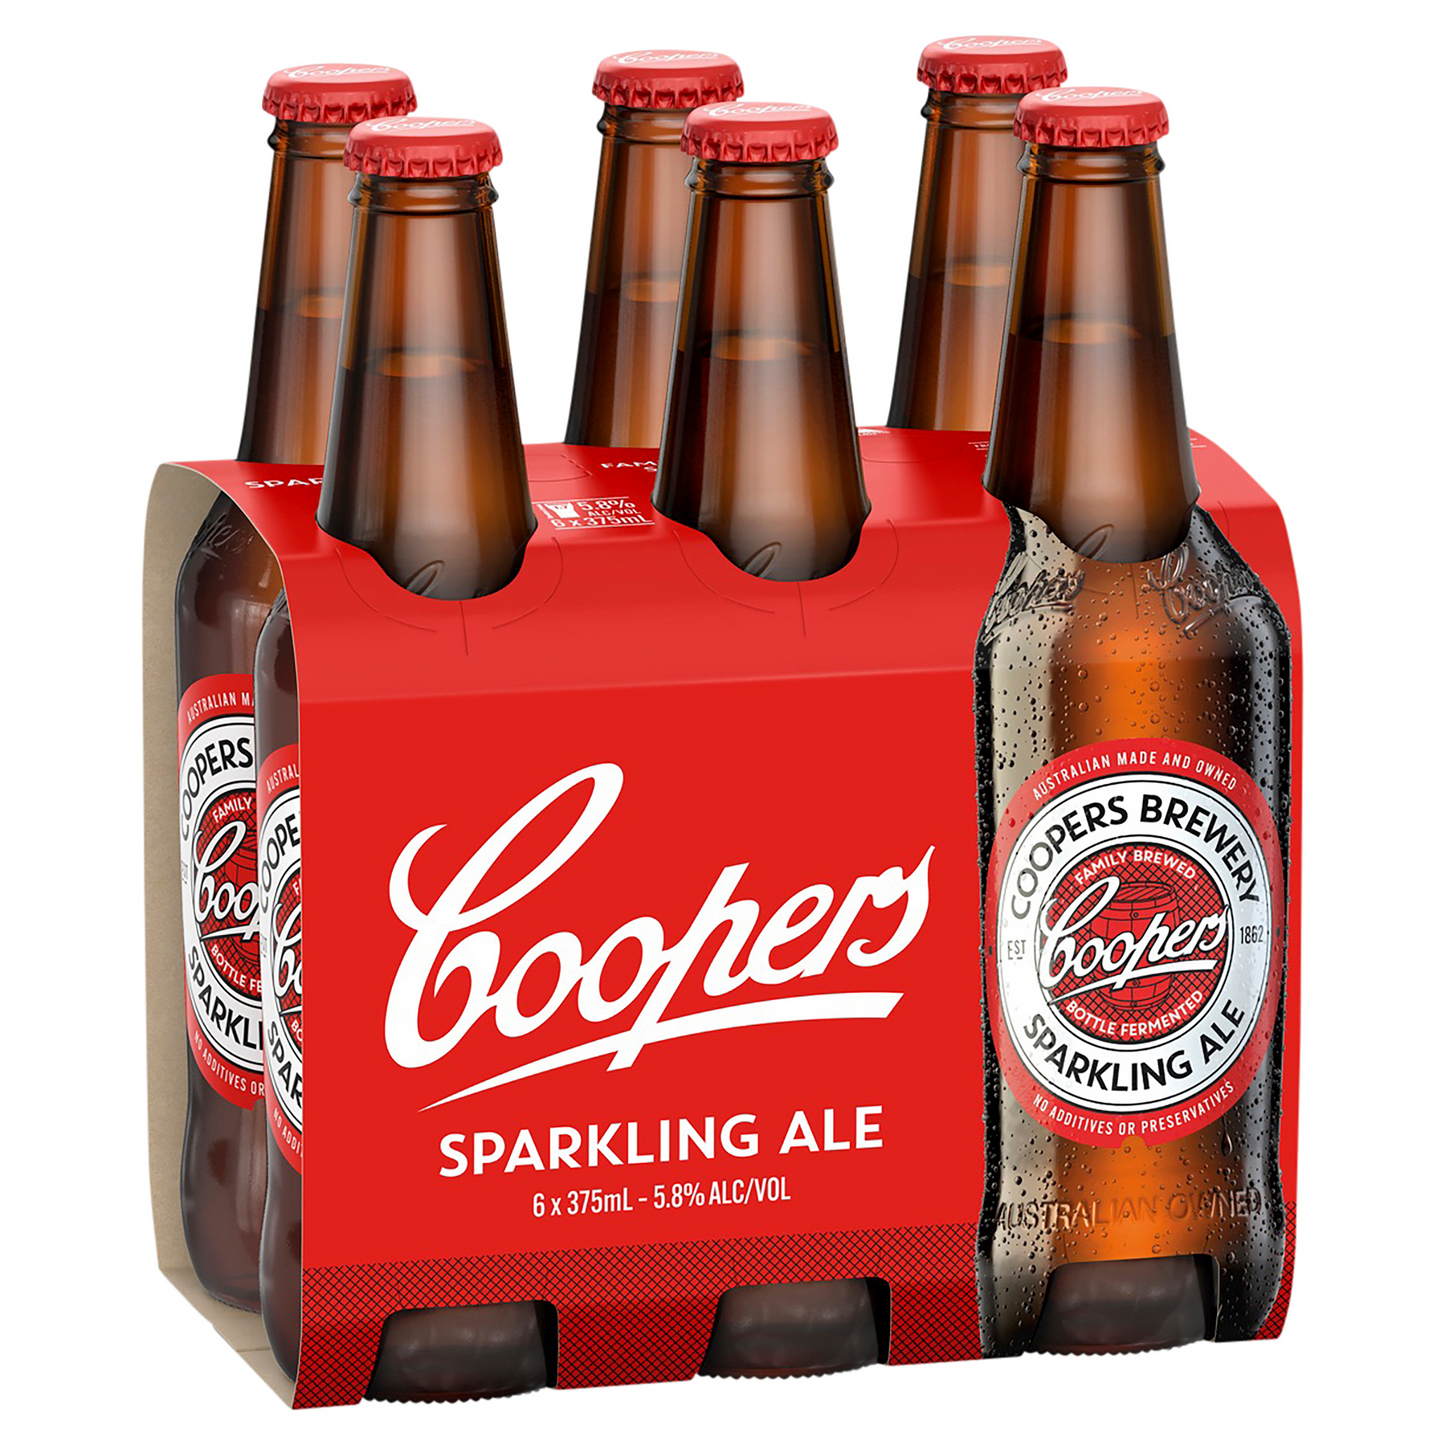 Coopers Sparkling Ale Bottles 6x375mL